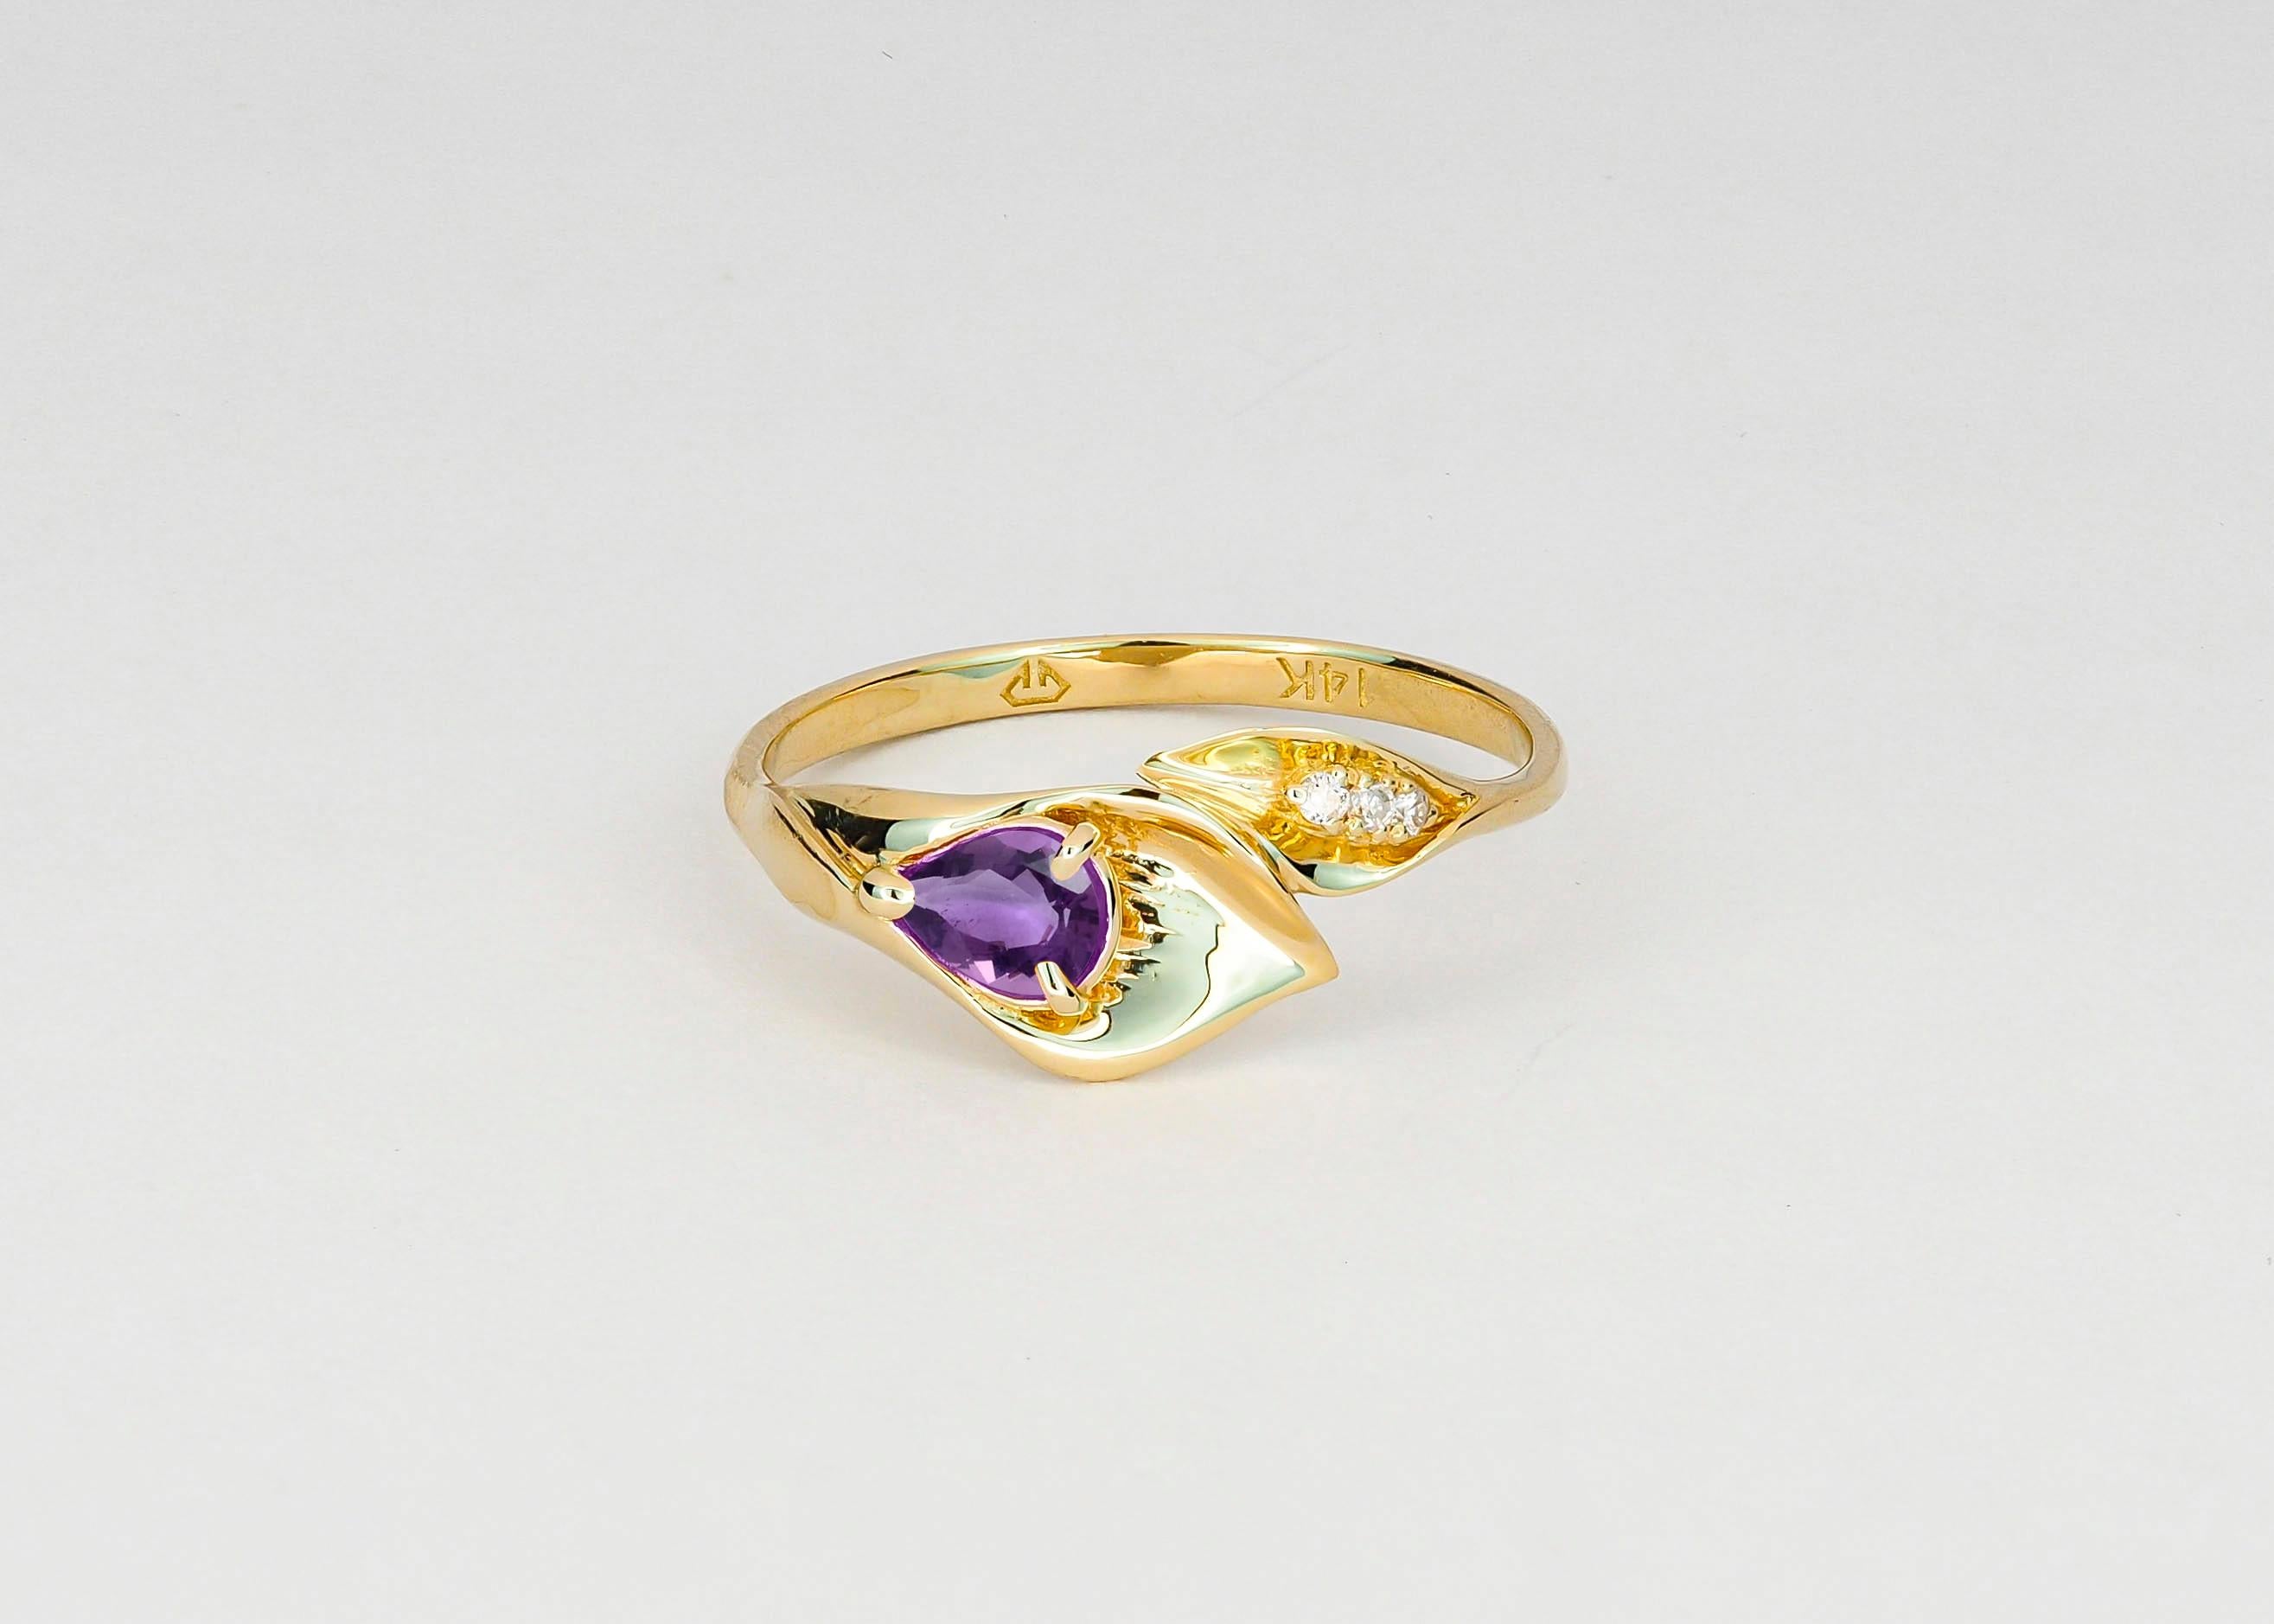 For Sale:  Lily Calla Gold Ring, 14 Karat Gold Ring with Amethyst and Diamonds 3